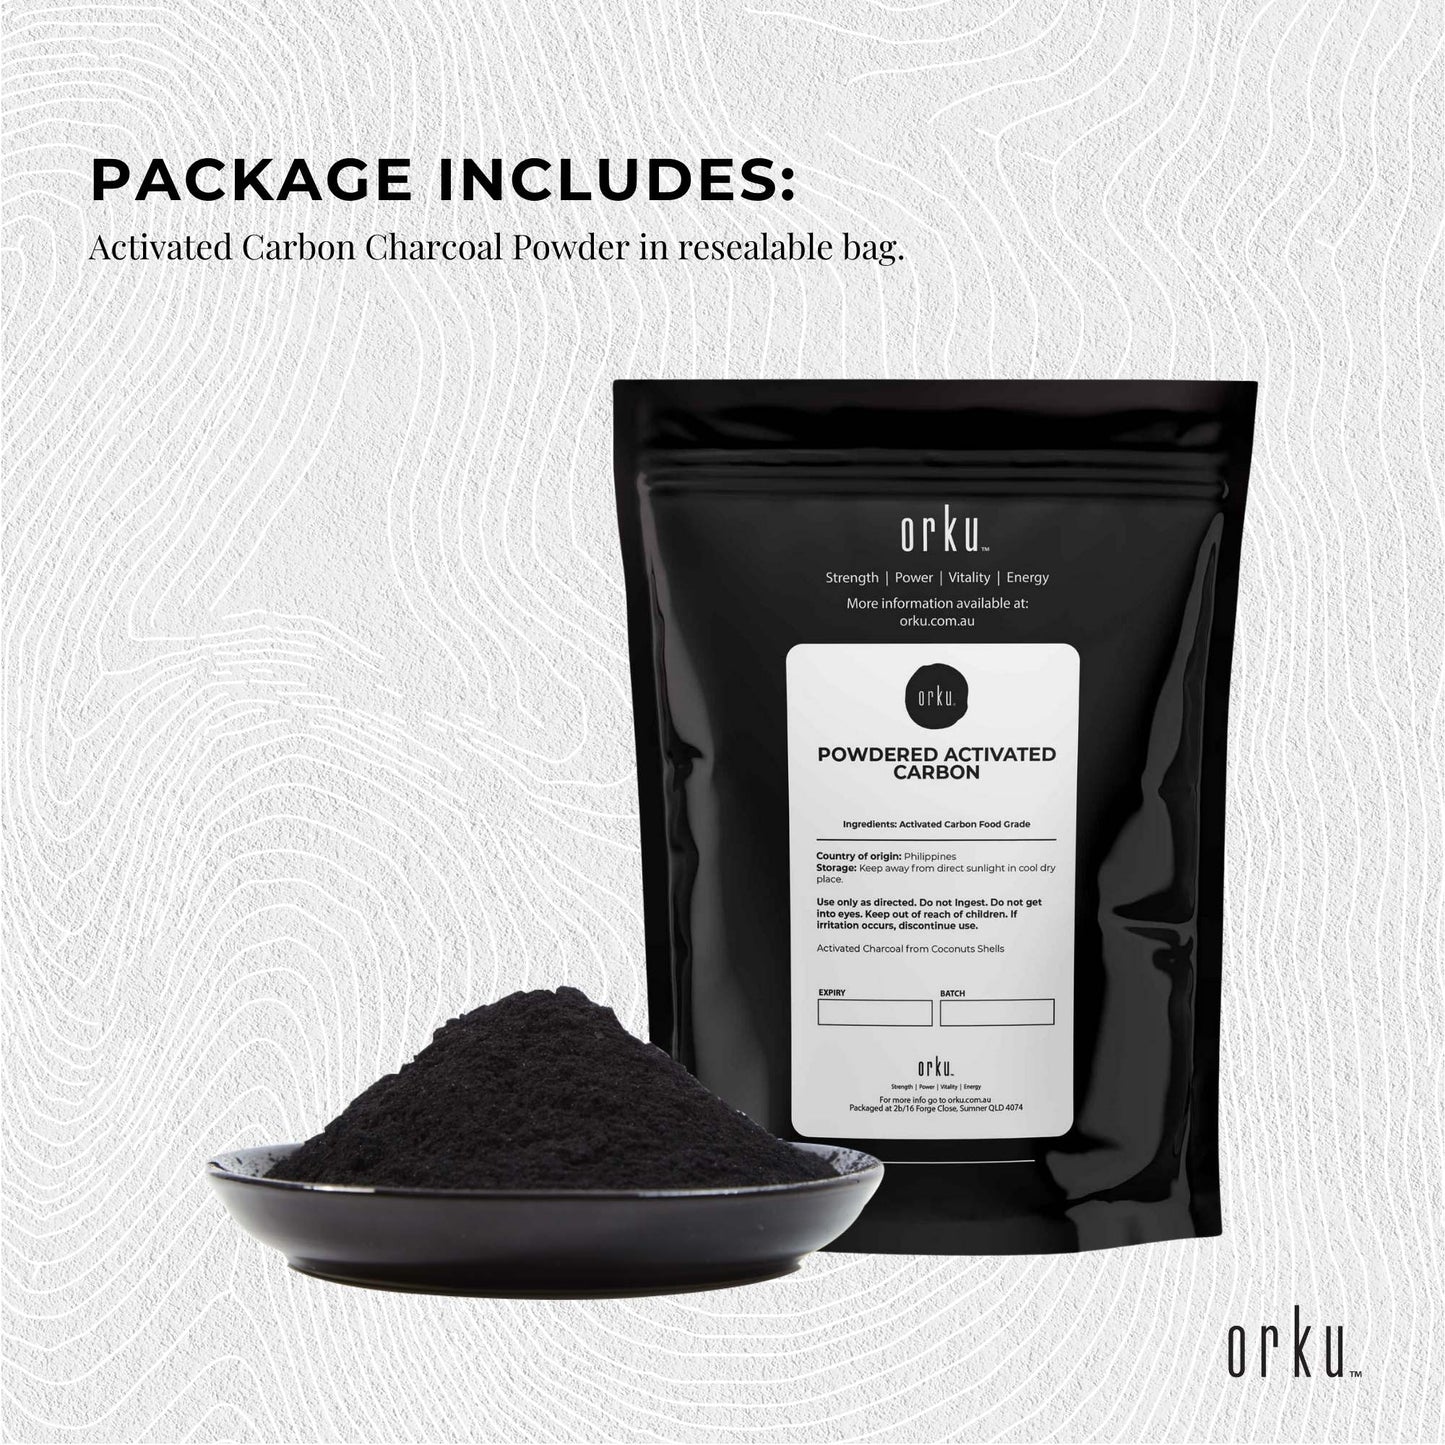 Activated Carbon Powder Coconut Charcoal - Teeth Whitening + Skin Bulk